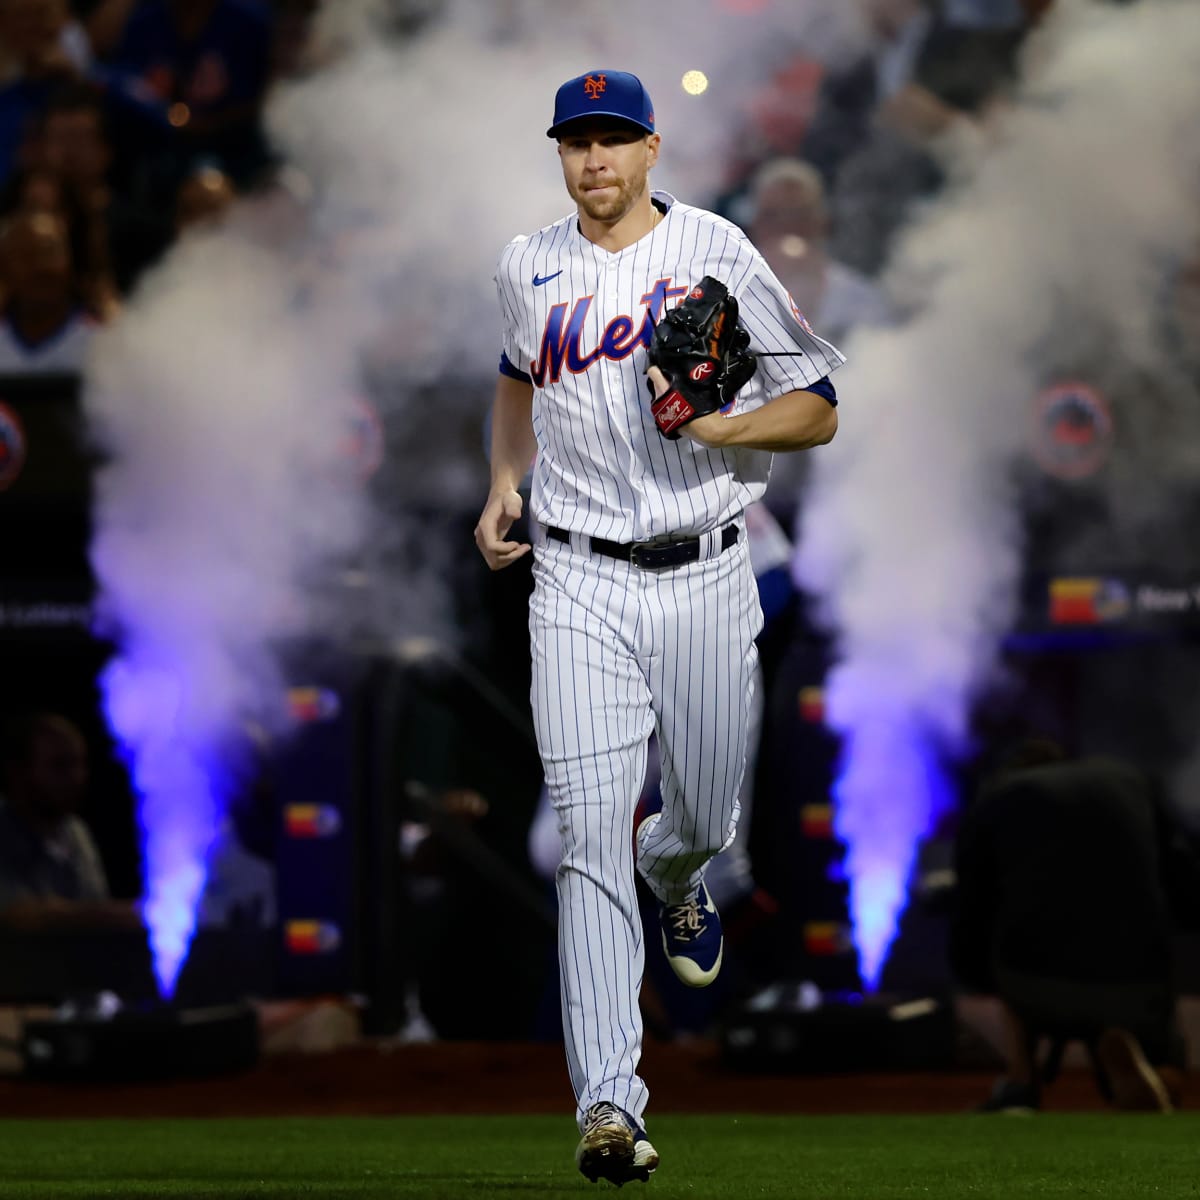 Jacob deGrom's words hard to believe for Mets fans - Newsday